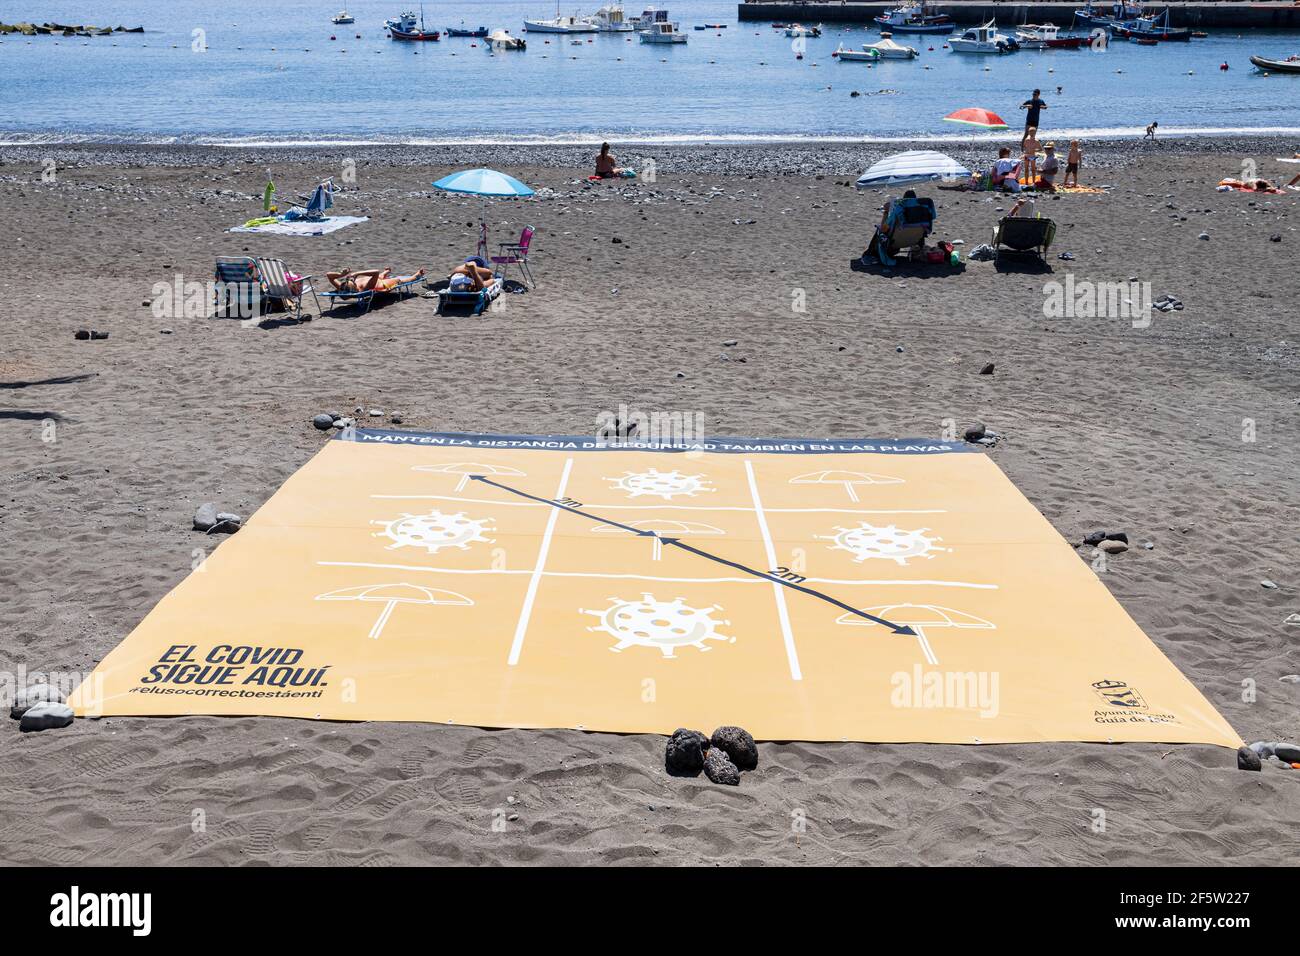 Large banner with graphic design to demonstrate the two metre social distancing rules to be maintained due to Covid 19 on the beach at Playa San Juan, Stock Photo